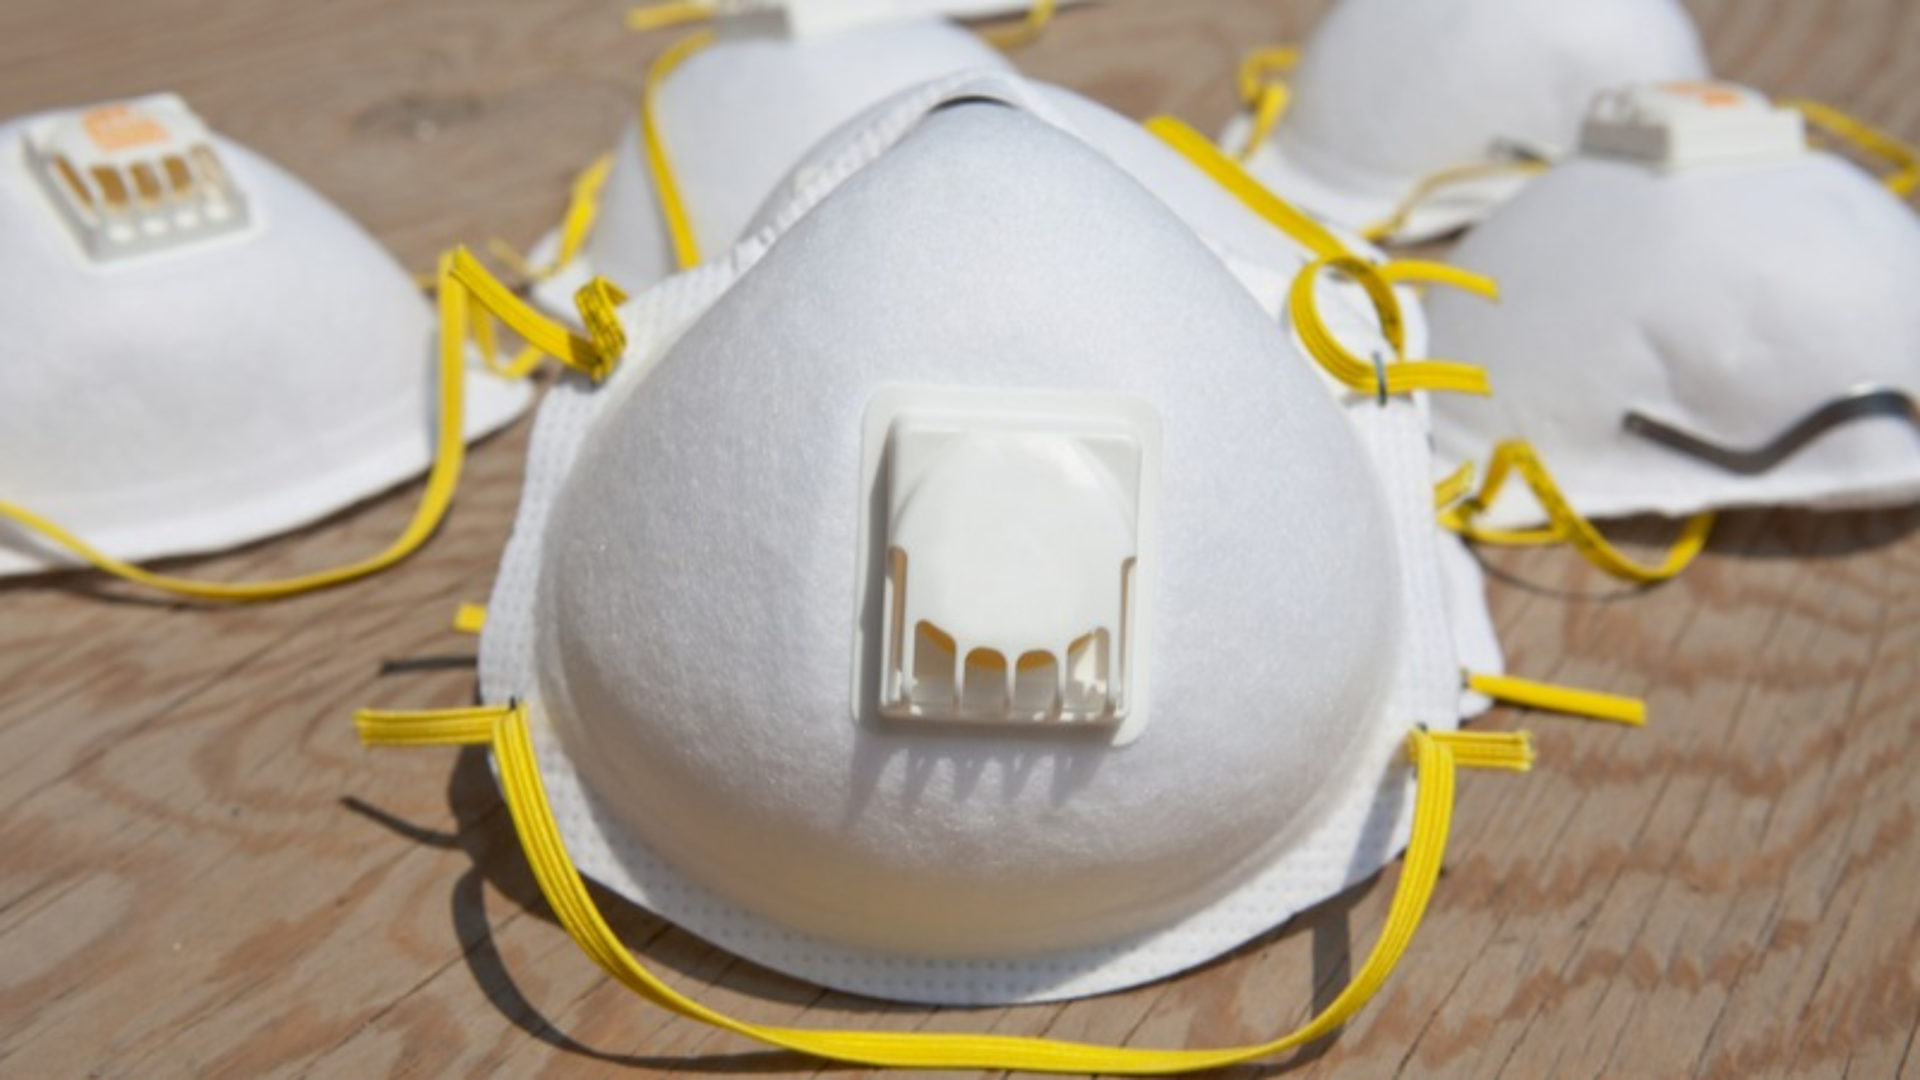 Dust inspection campaign - Five white masks with yellow strings.